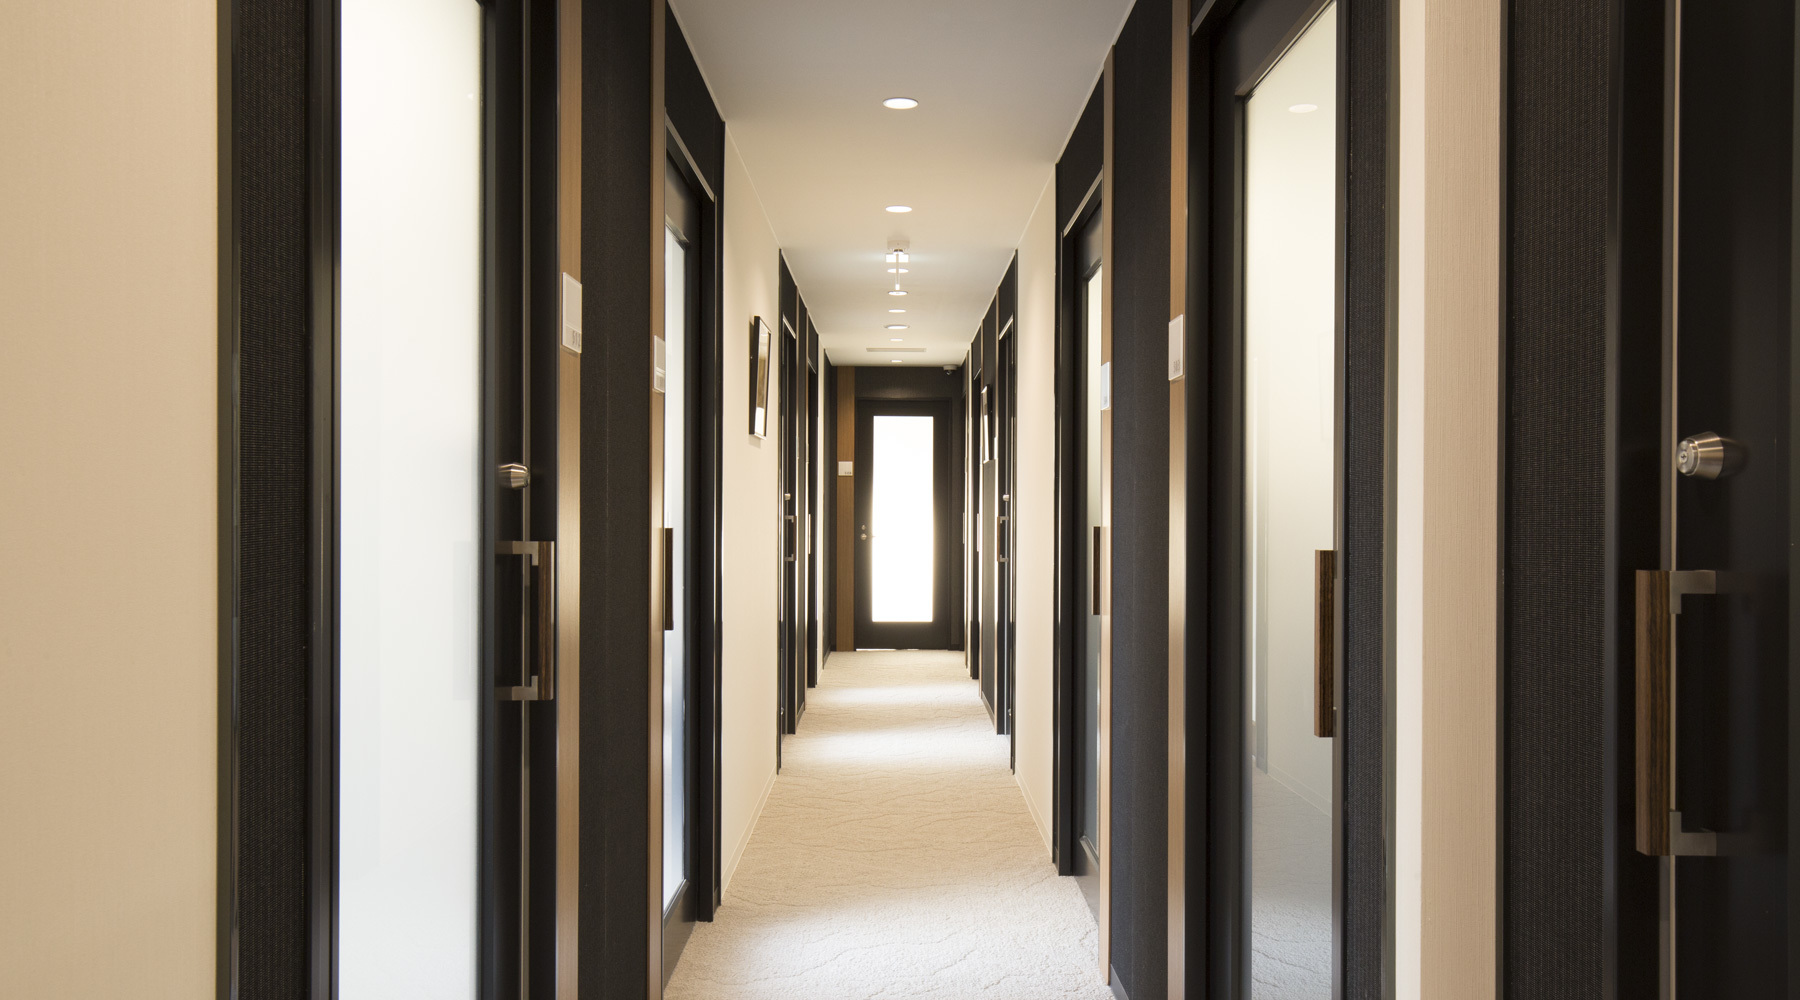 Corridors_The doors of each private room are designed with polished glass for privacy.